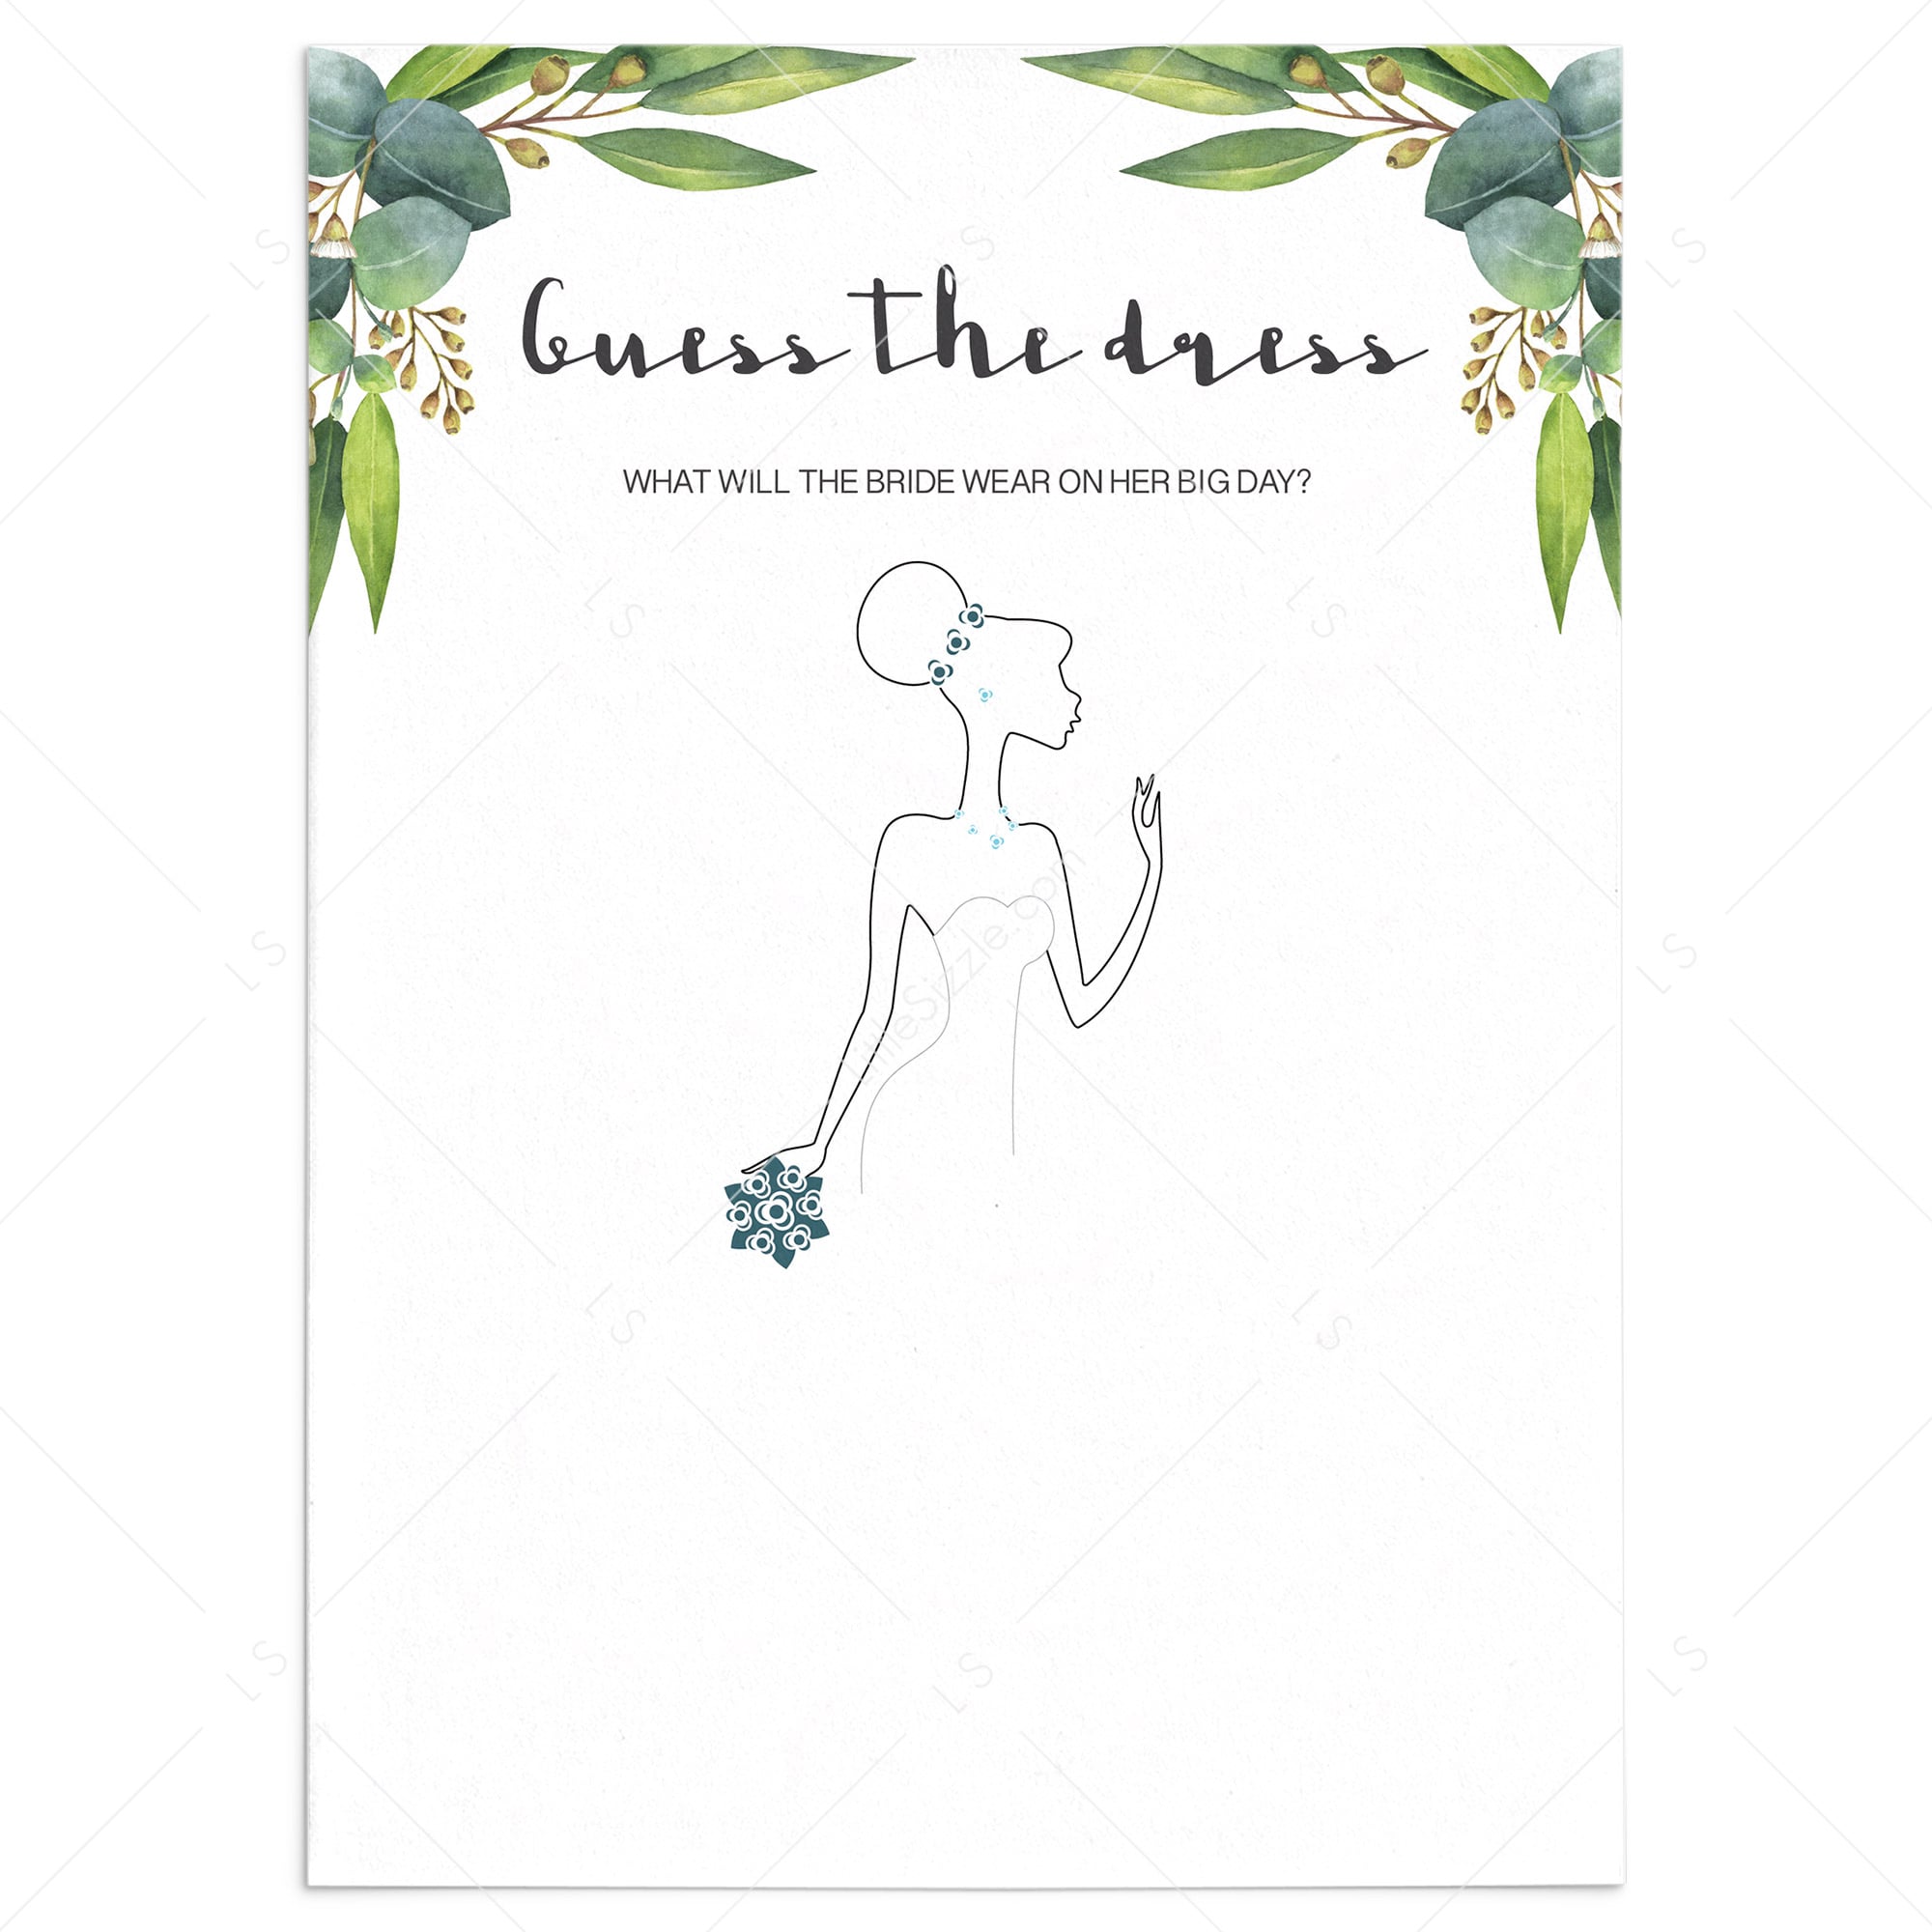 classic bridal shower game guess the dress printable by LittleSizzle